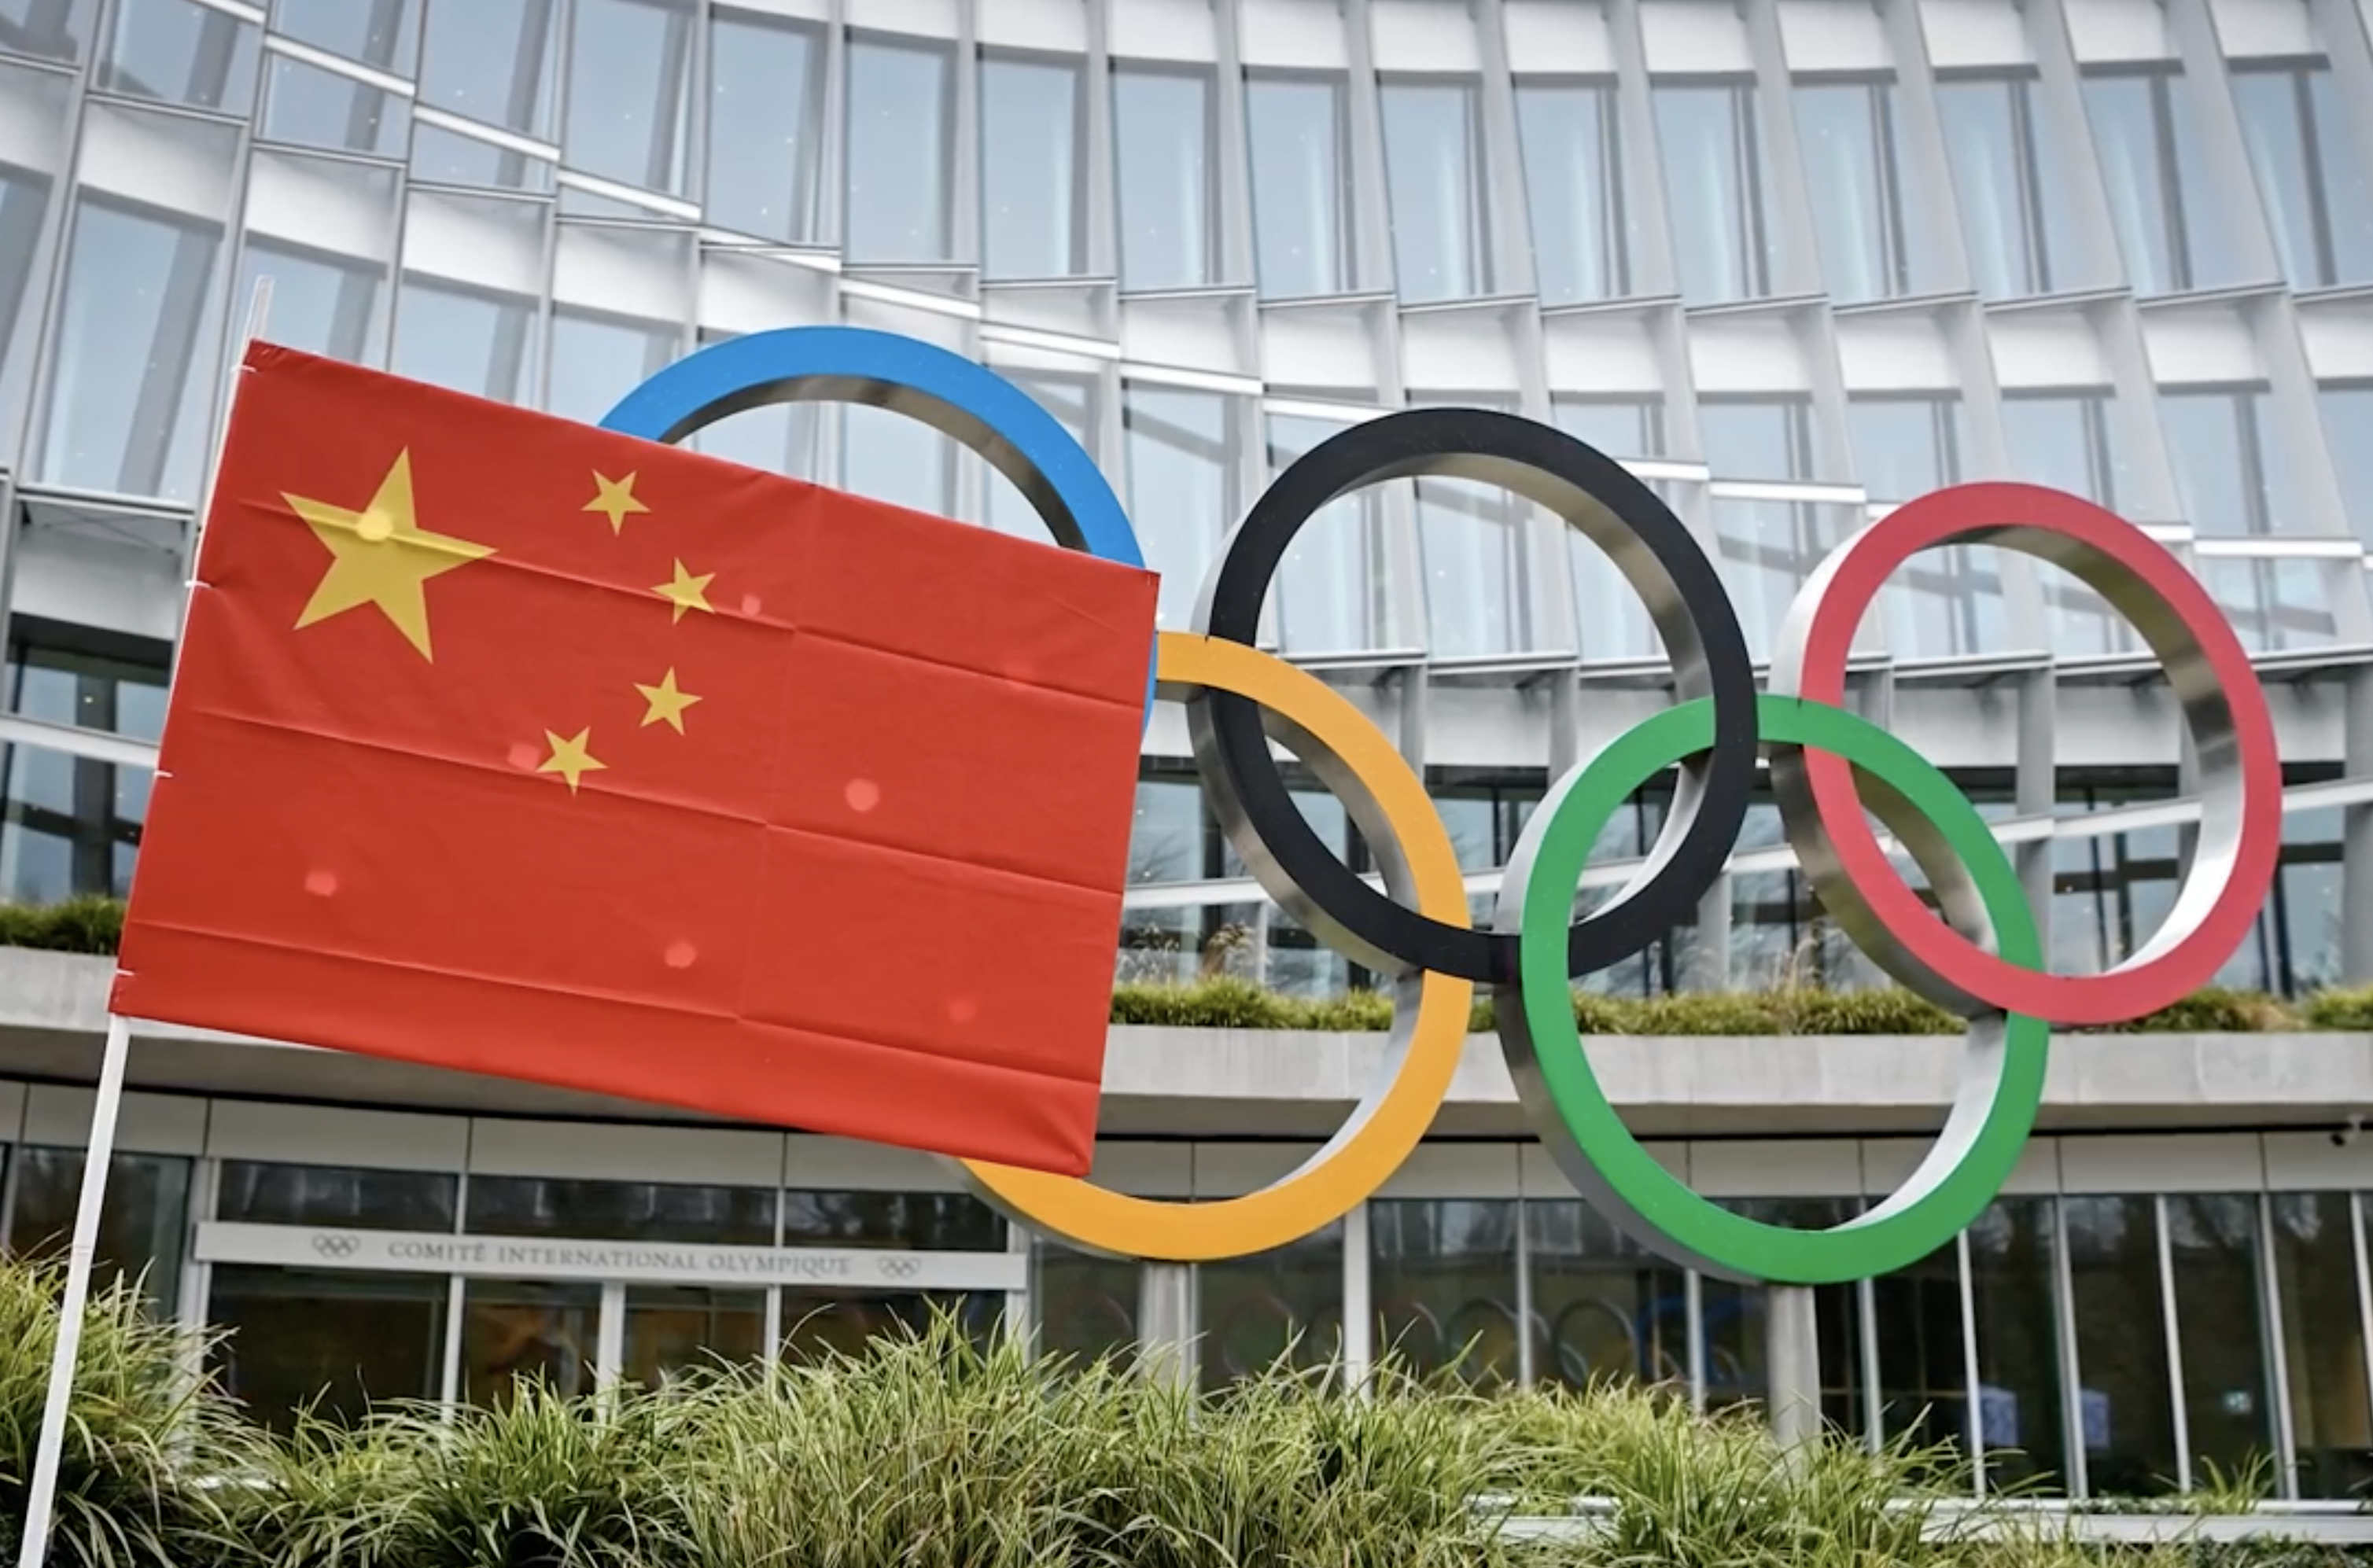 NBC won’t send sports announcing teams to 2022 Winter Olympics in Beijing due to COVID-19